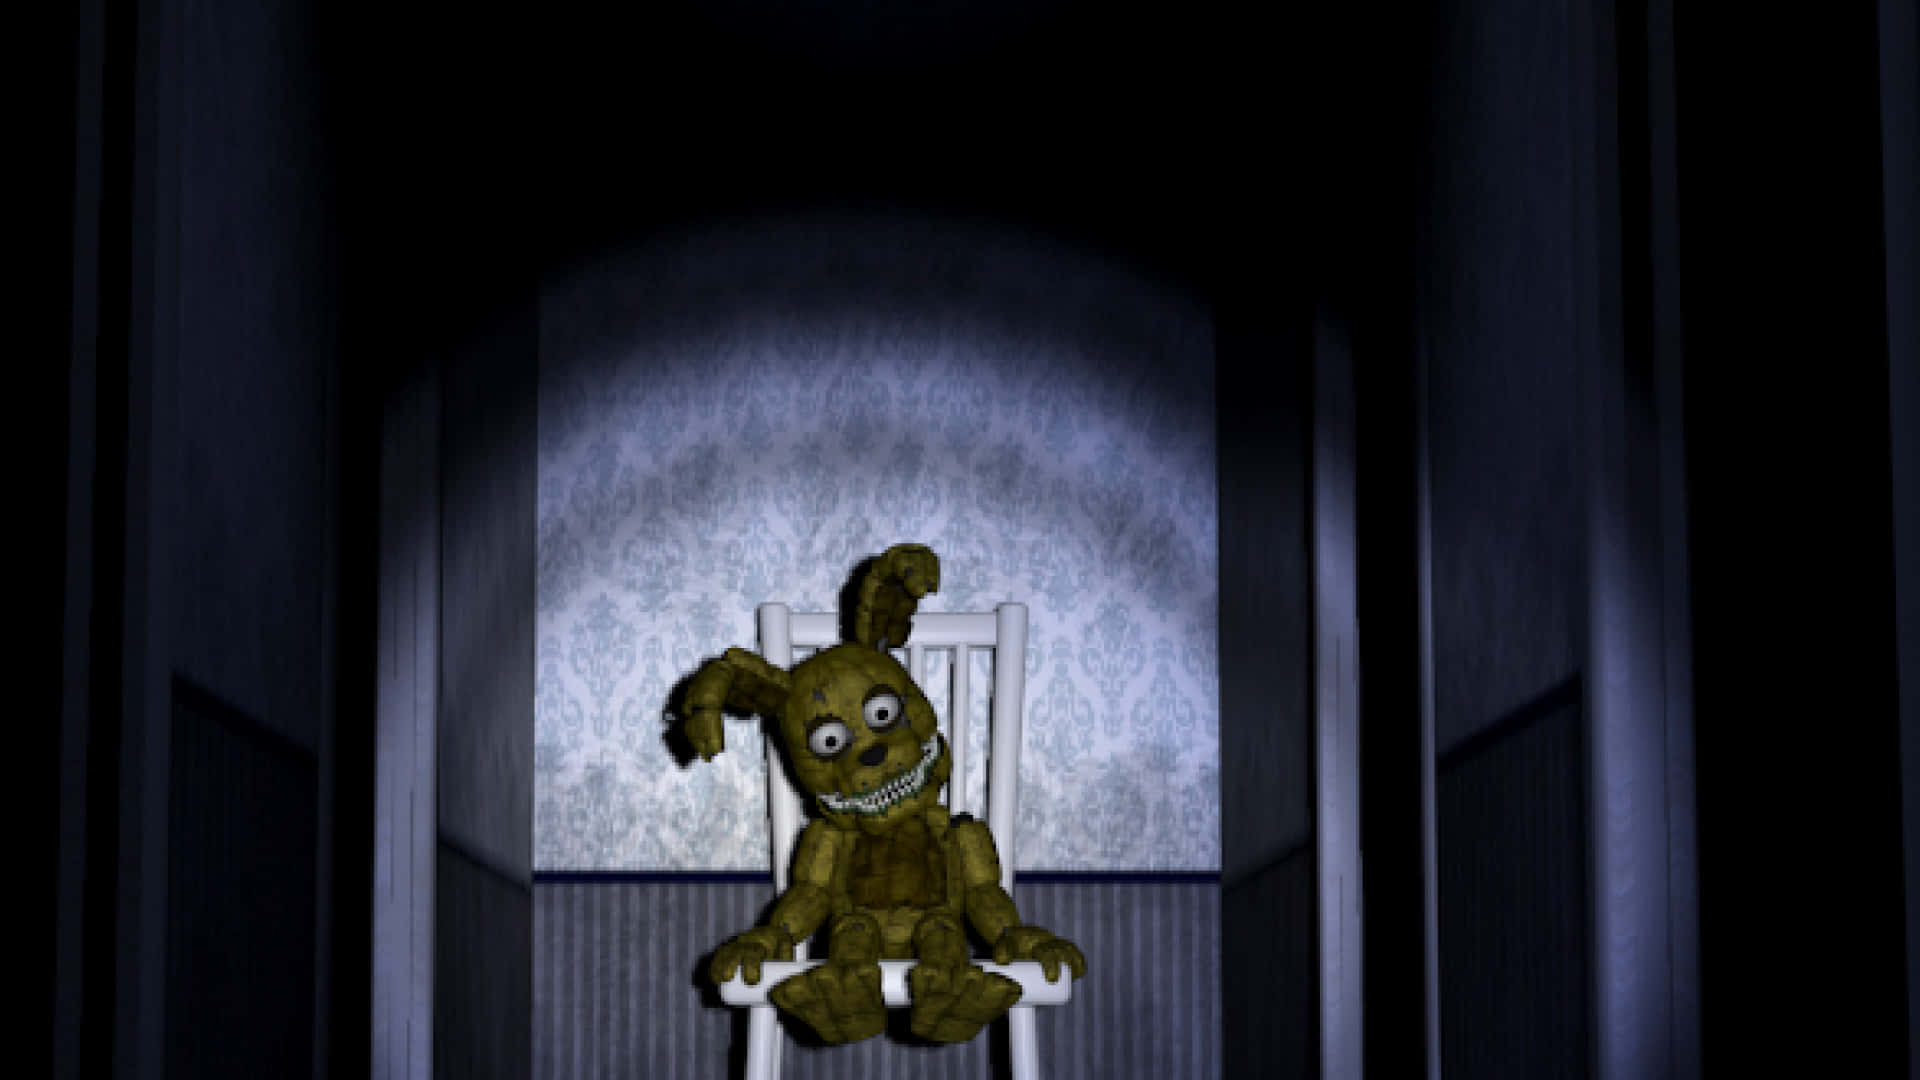 “Peek into The Dreadful House of Five Nights At Freddy’s 4” Wallpaper